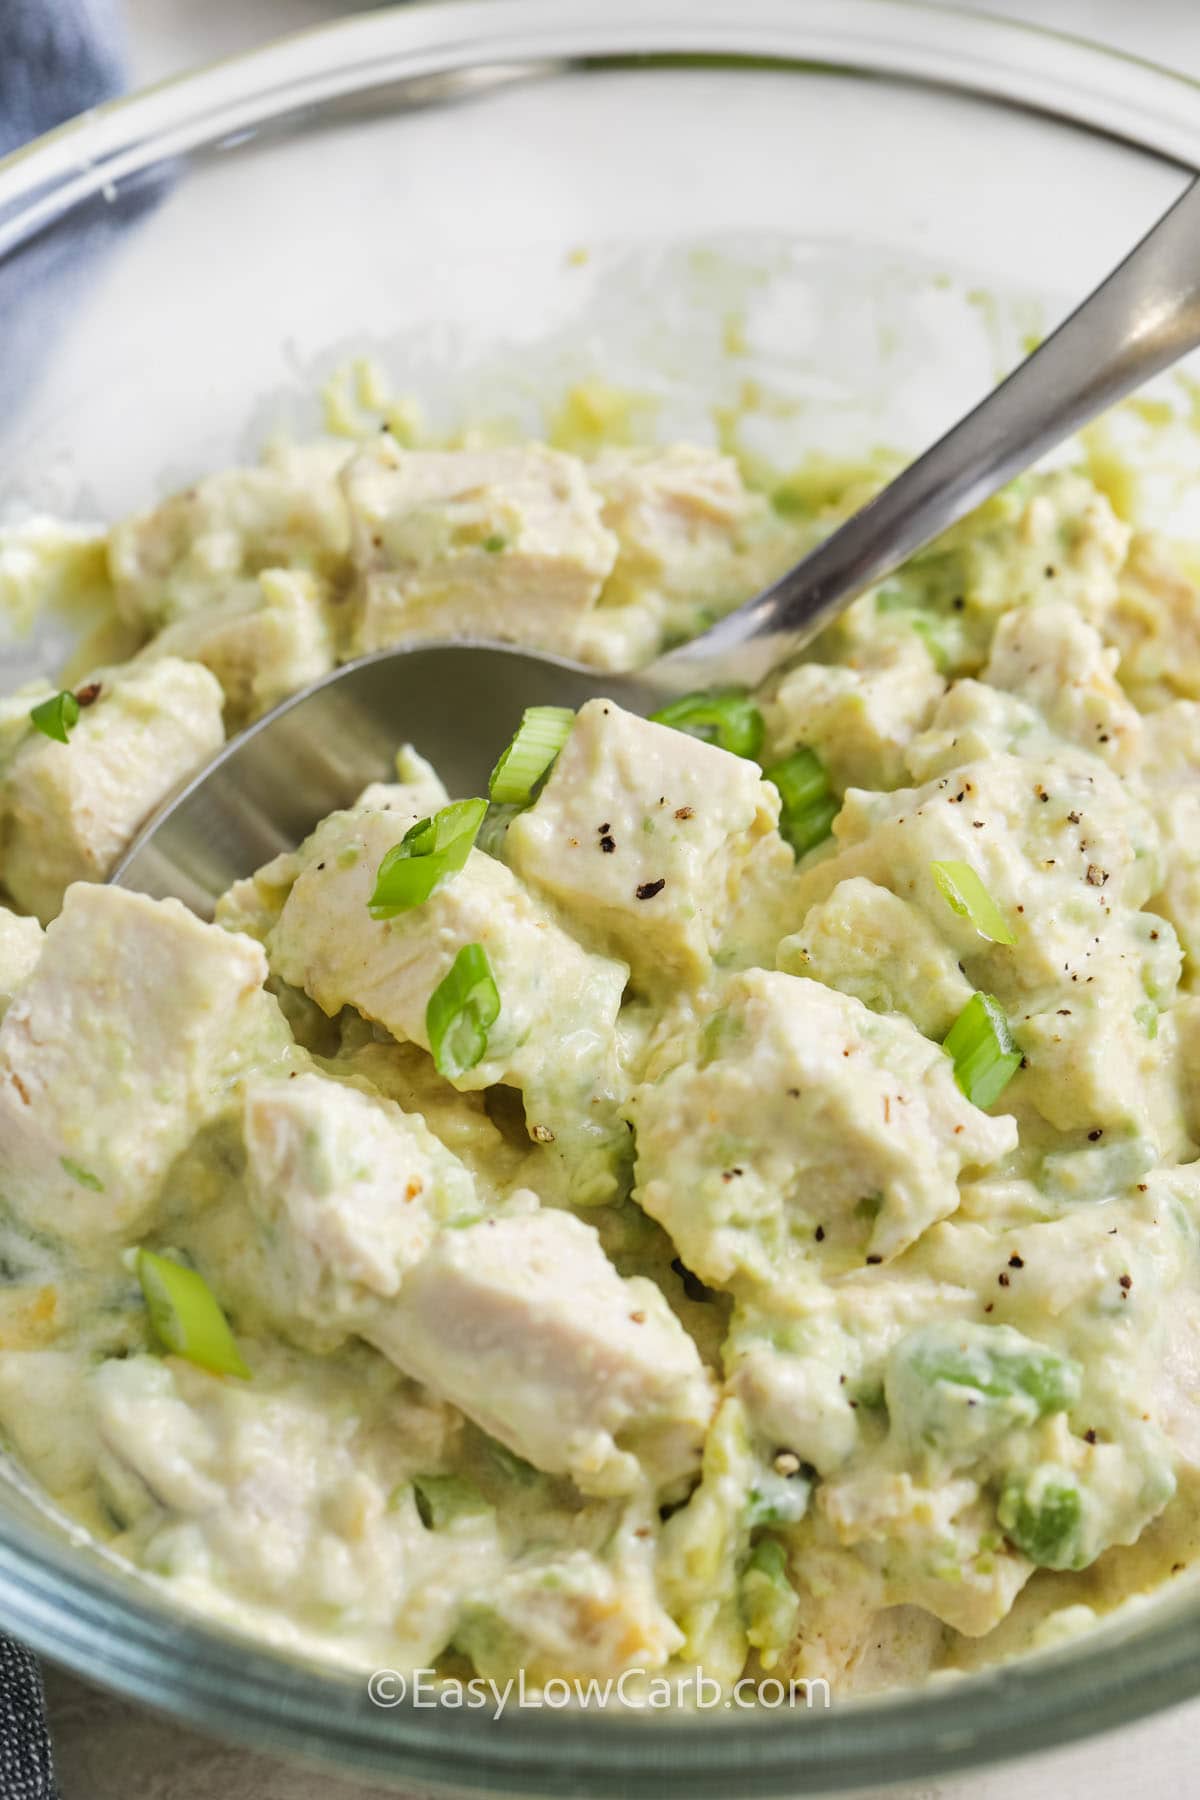 Avocado Chicken Salad with green onions